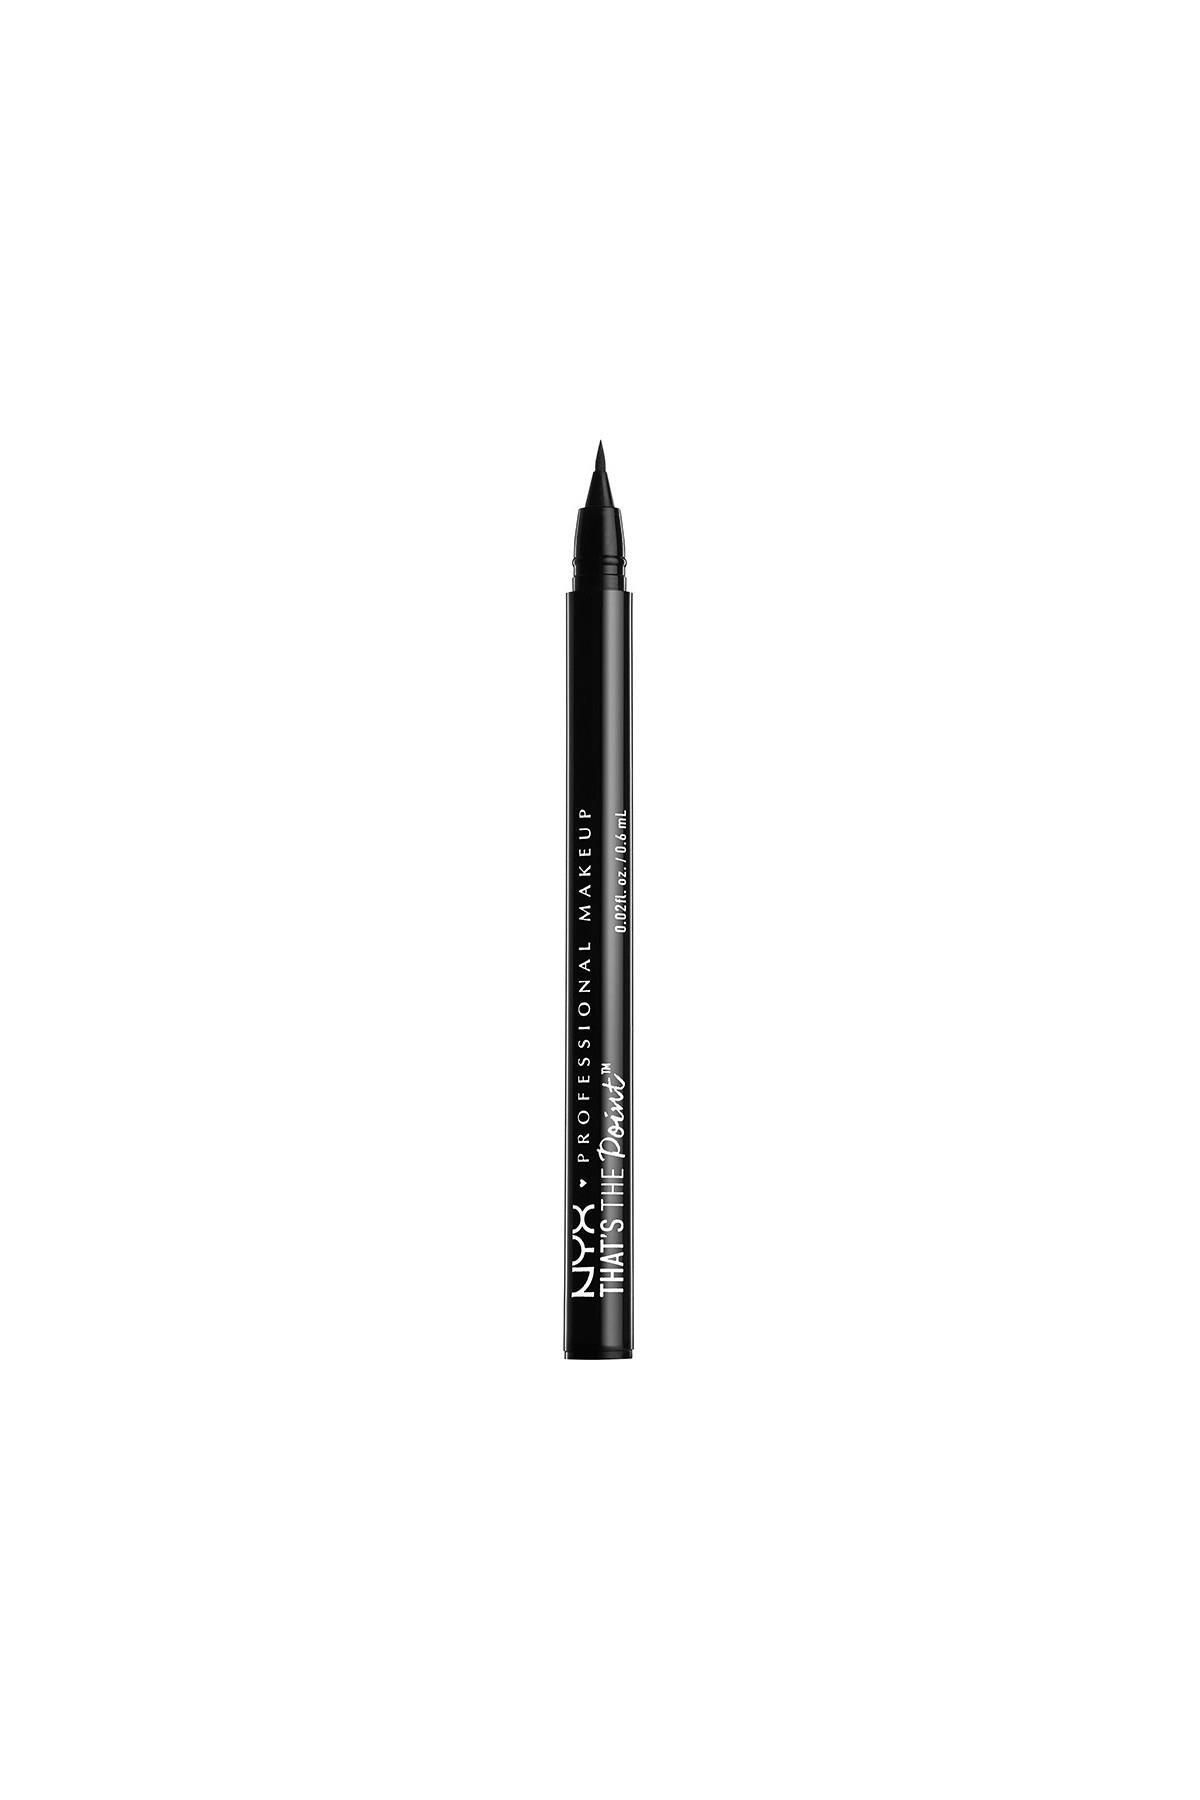 NYX Professional Makeup Eyeliner - That's The Point Eyeliner 07 800897107949